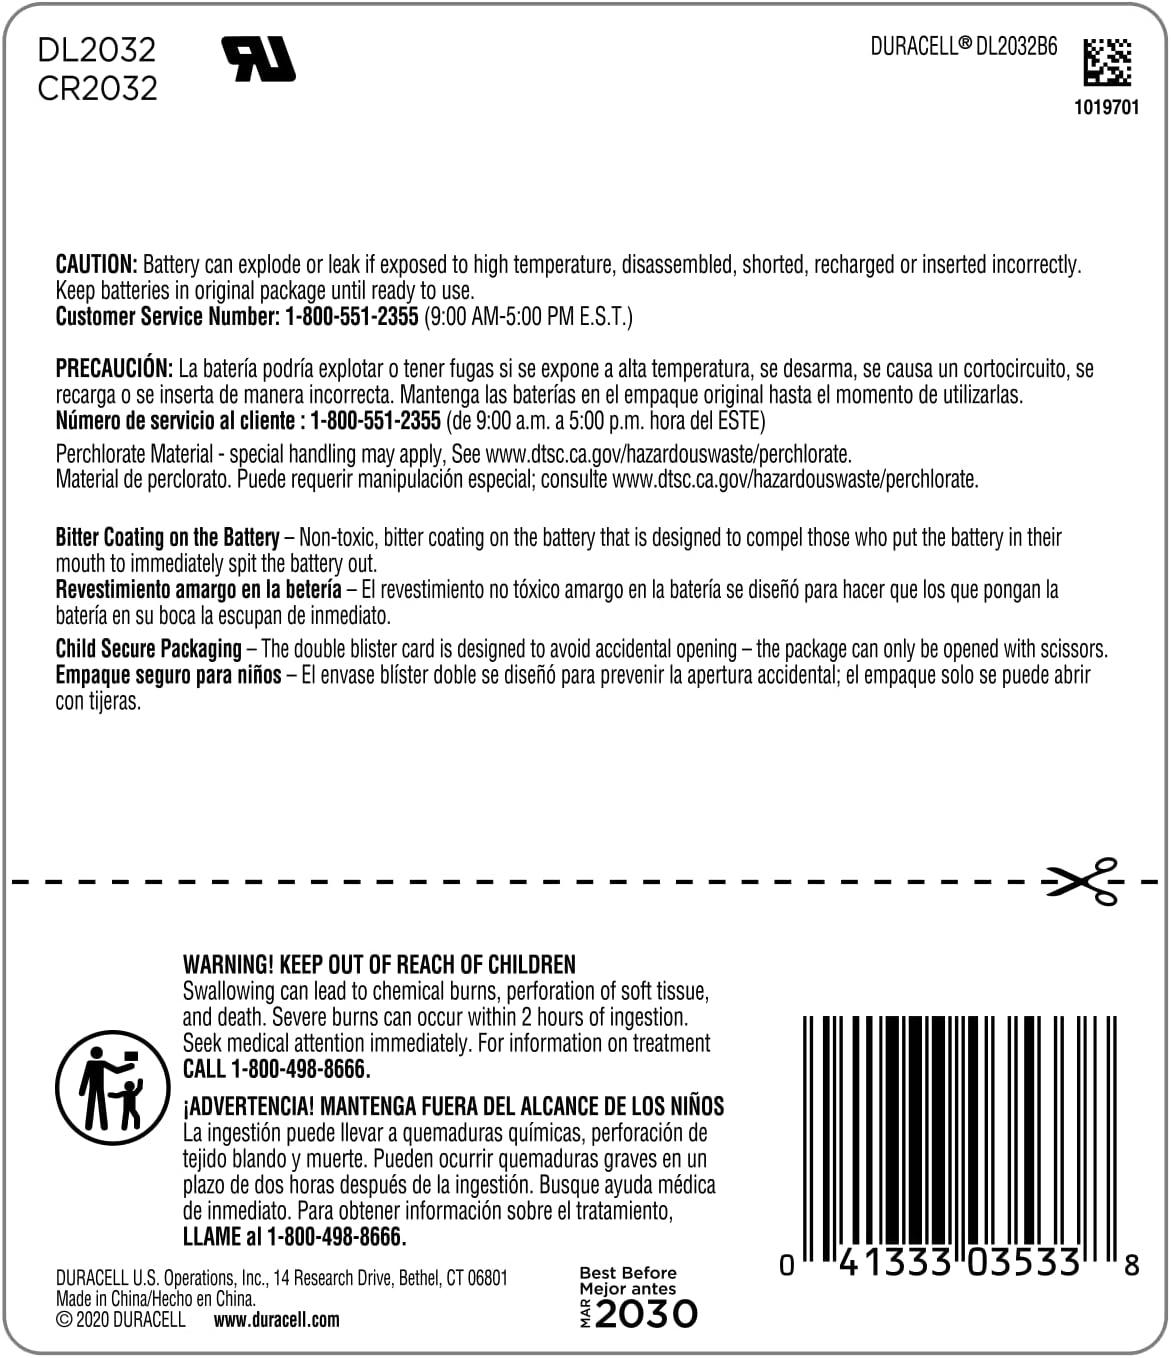 Duracell CR2032 3V Lithium Battery, Child Safety Features, 1 Count Pack,  Lithium Coin Battery for Key